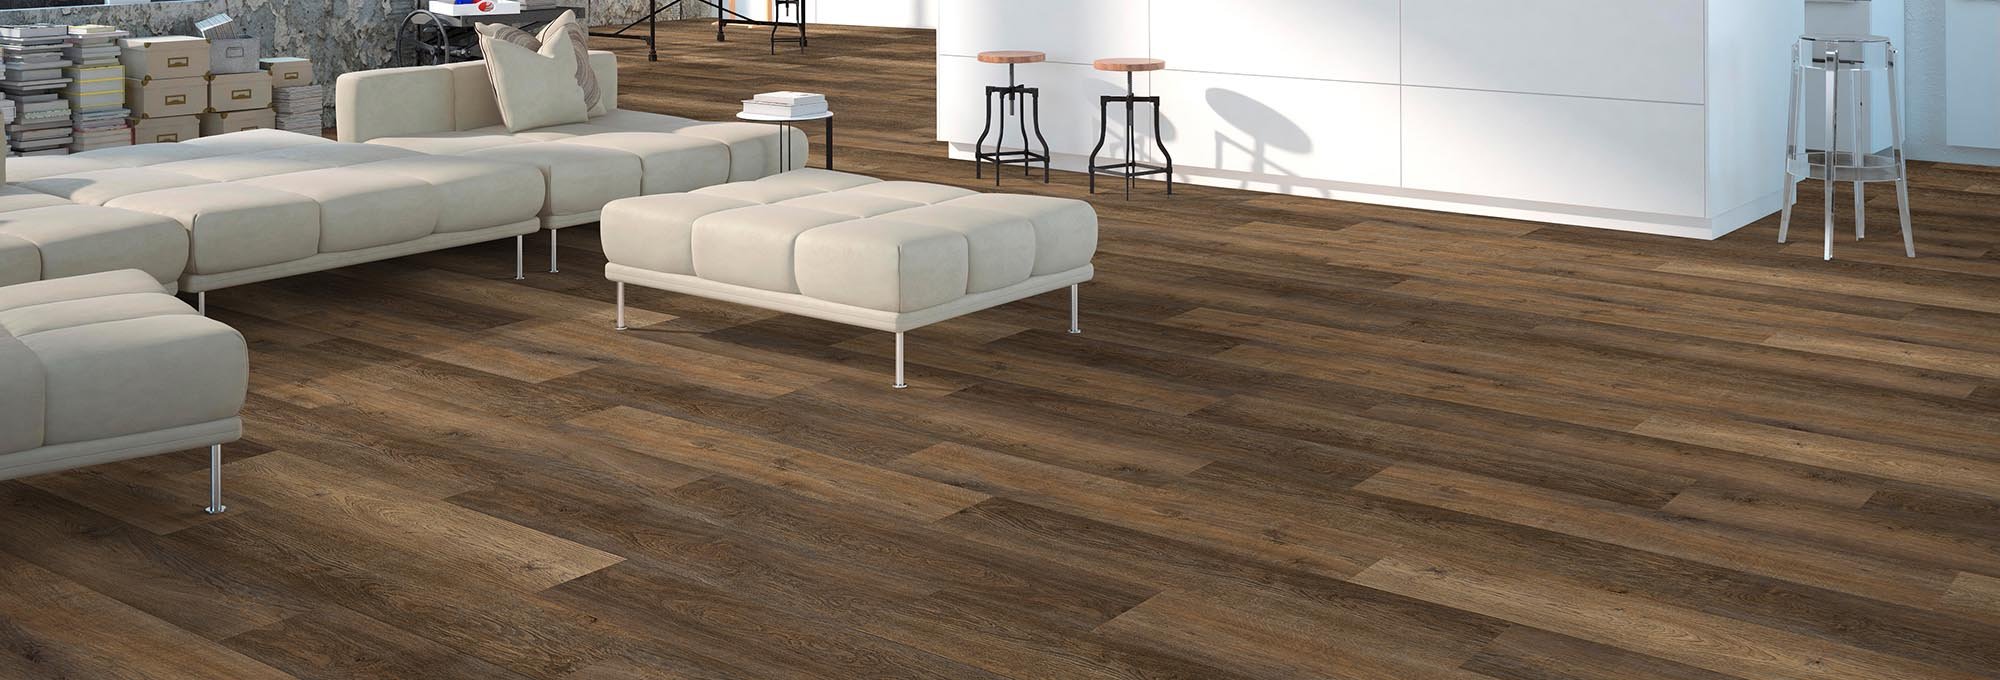 Shop Flooring Products from Dan Good Flooring in Payson, AZ